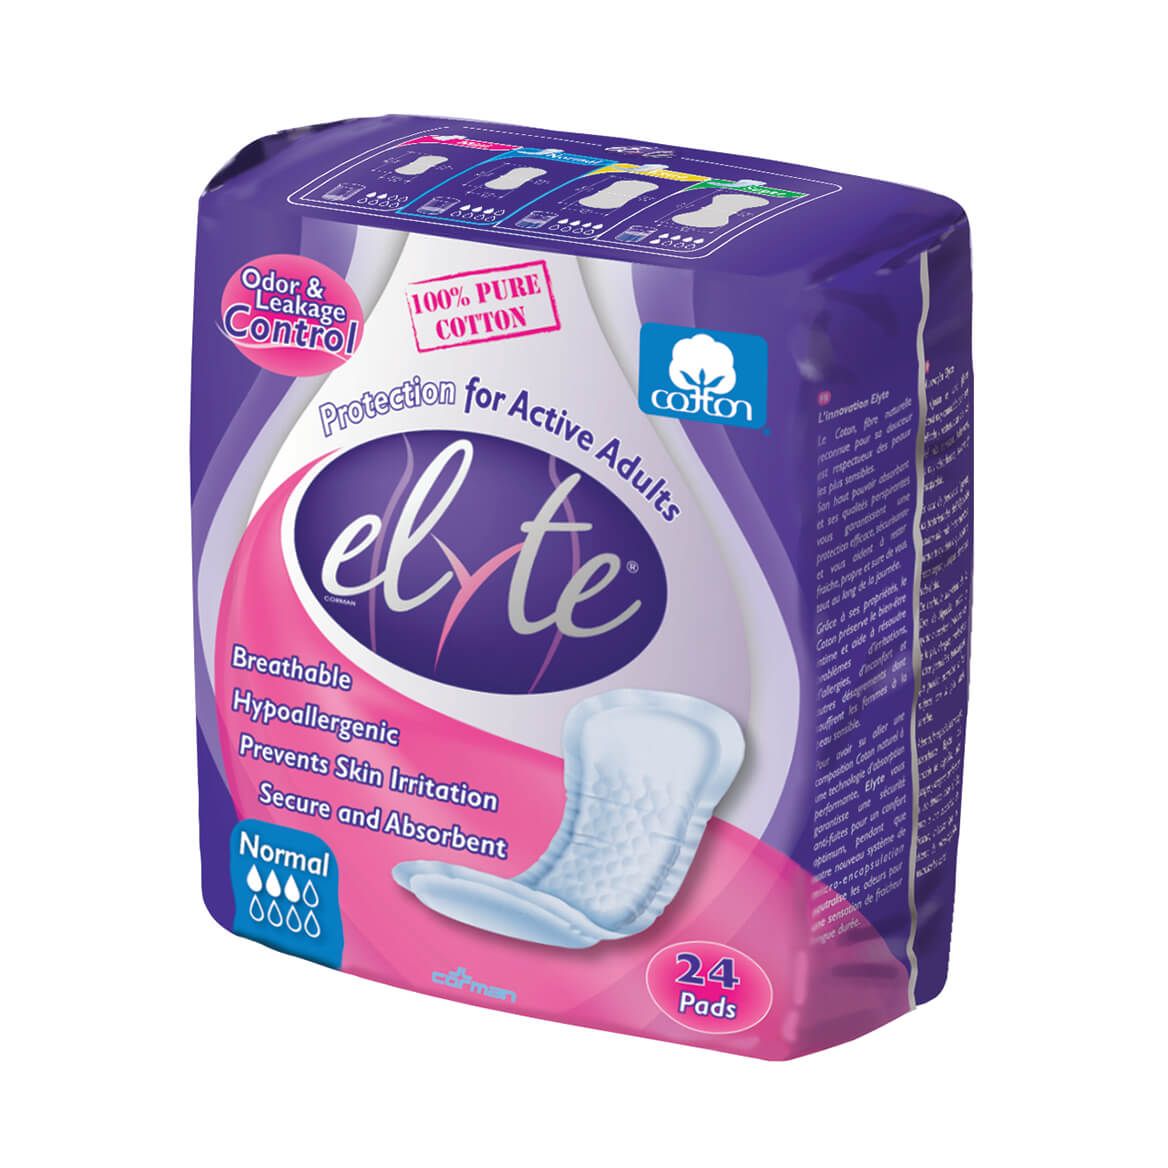 Elyte Incontinence Pads Normal - Case + '-' + 333028